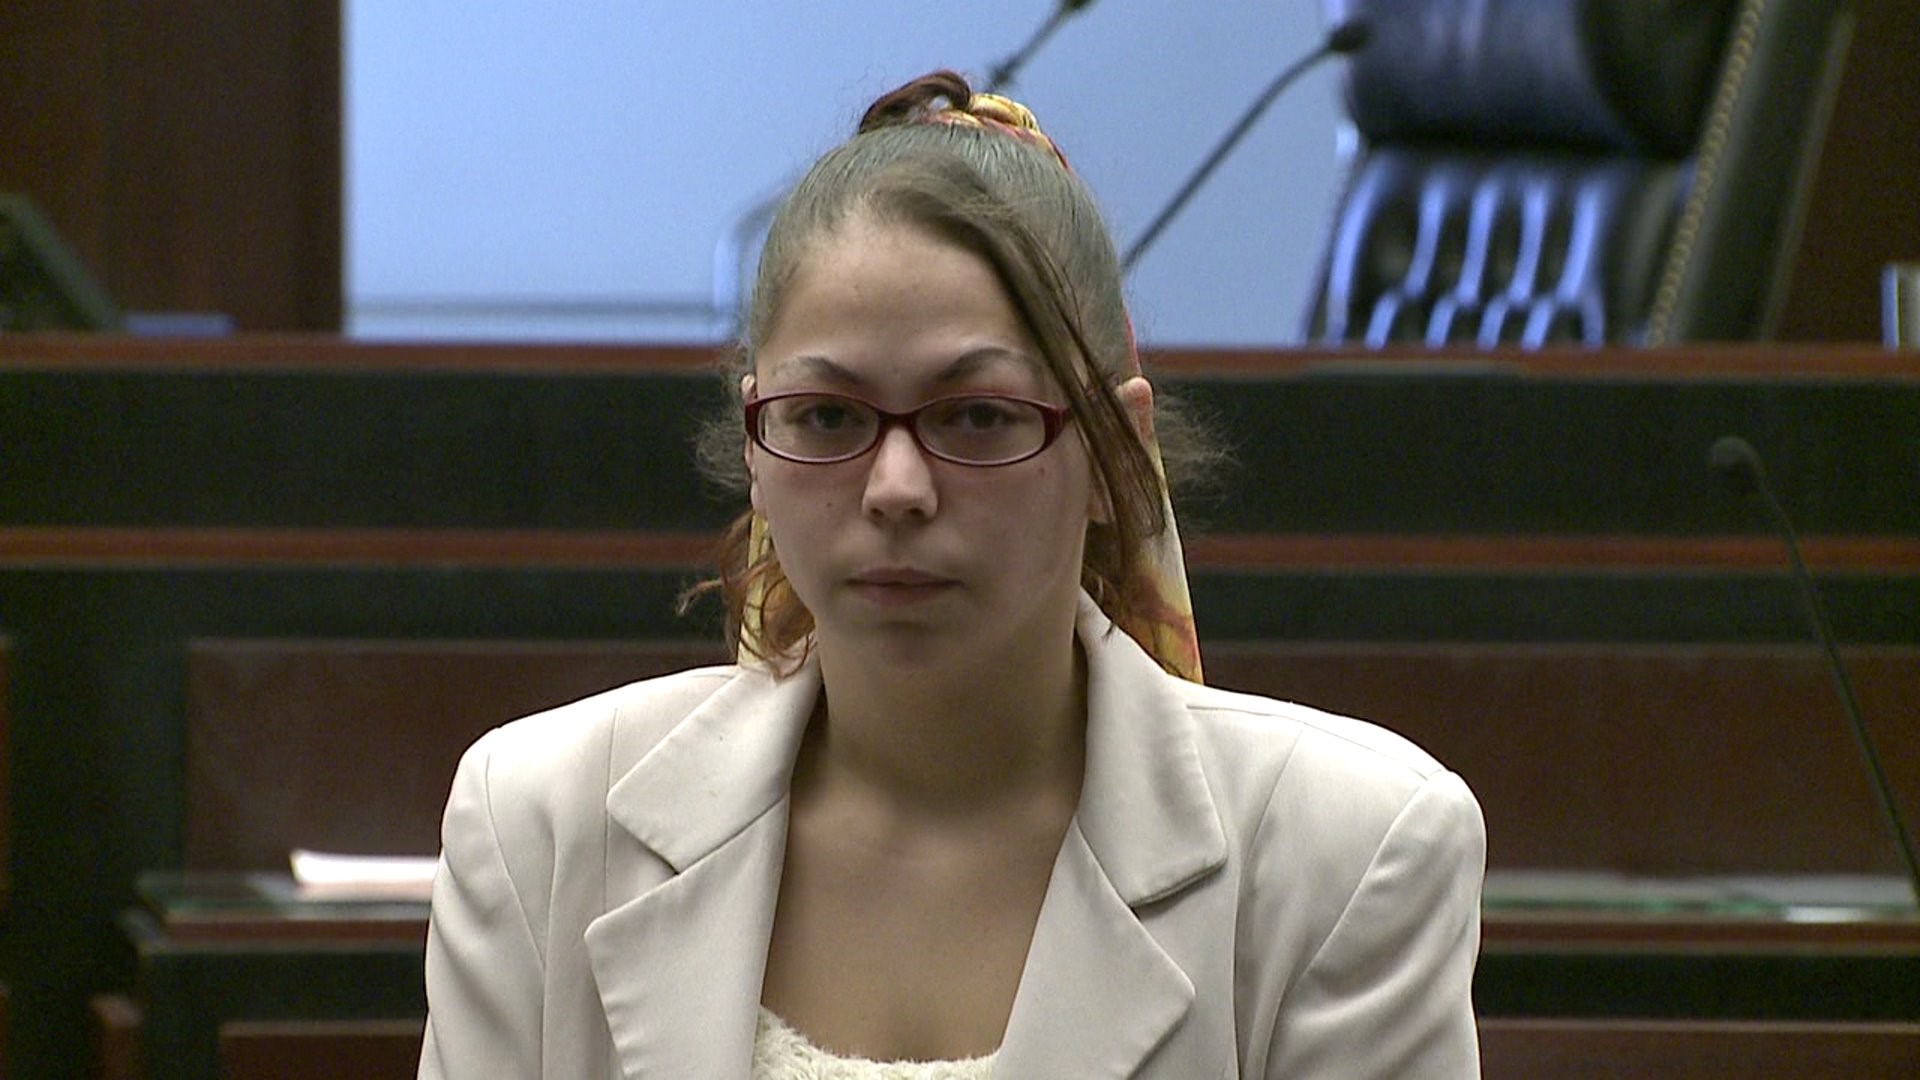 Woman arraigned on charges of reckless homicide in "Can Man" death